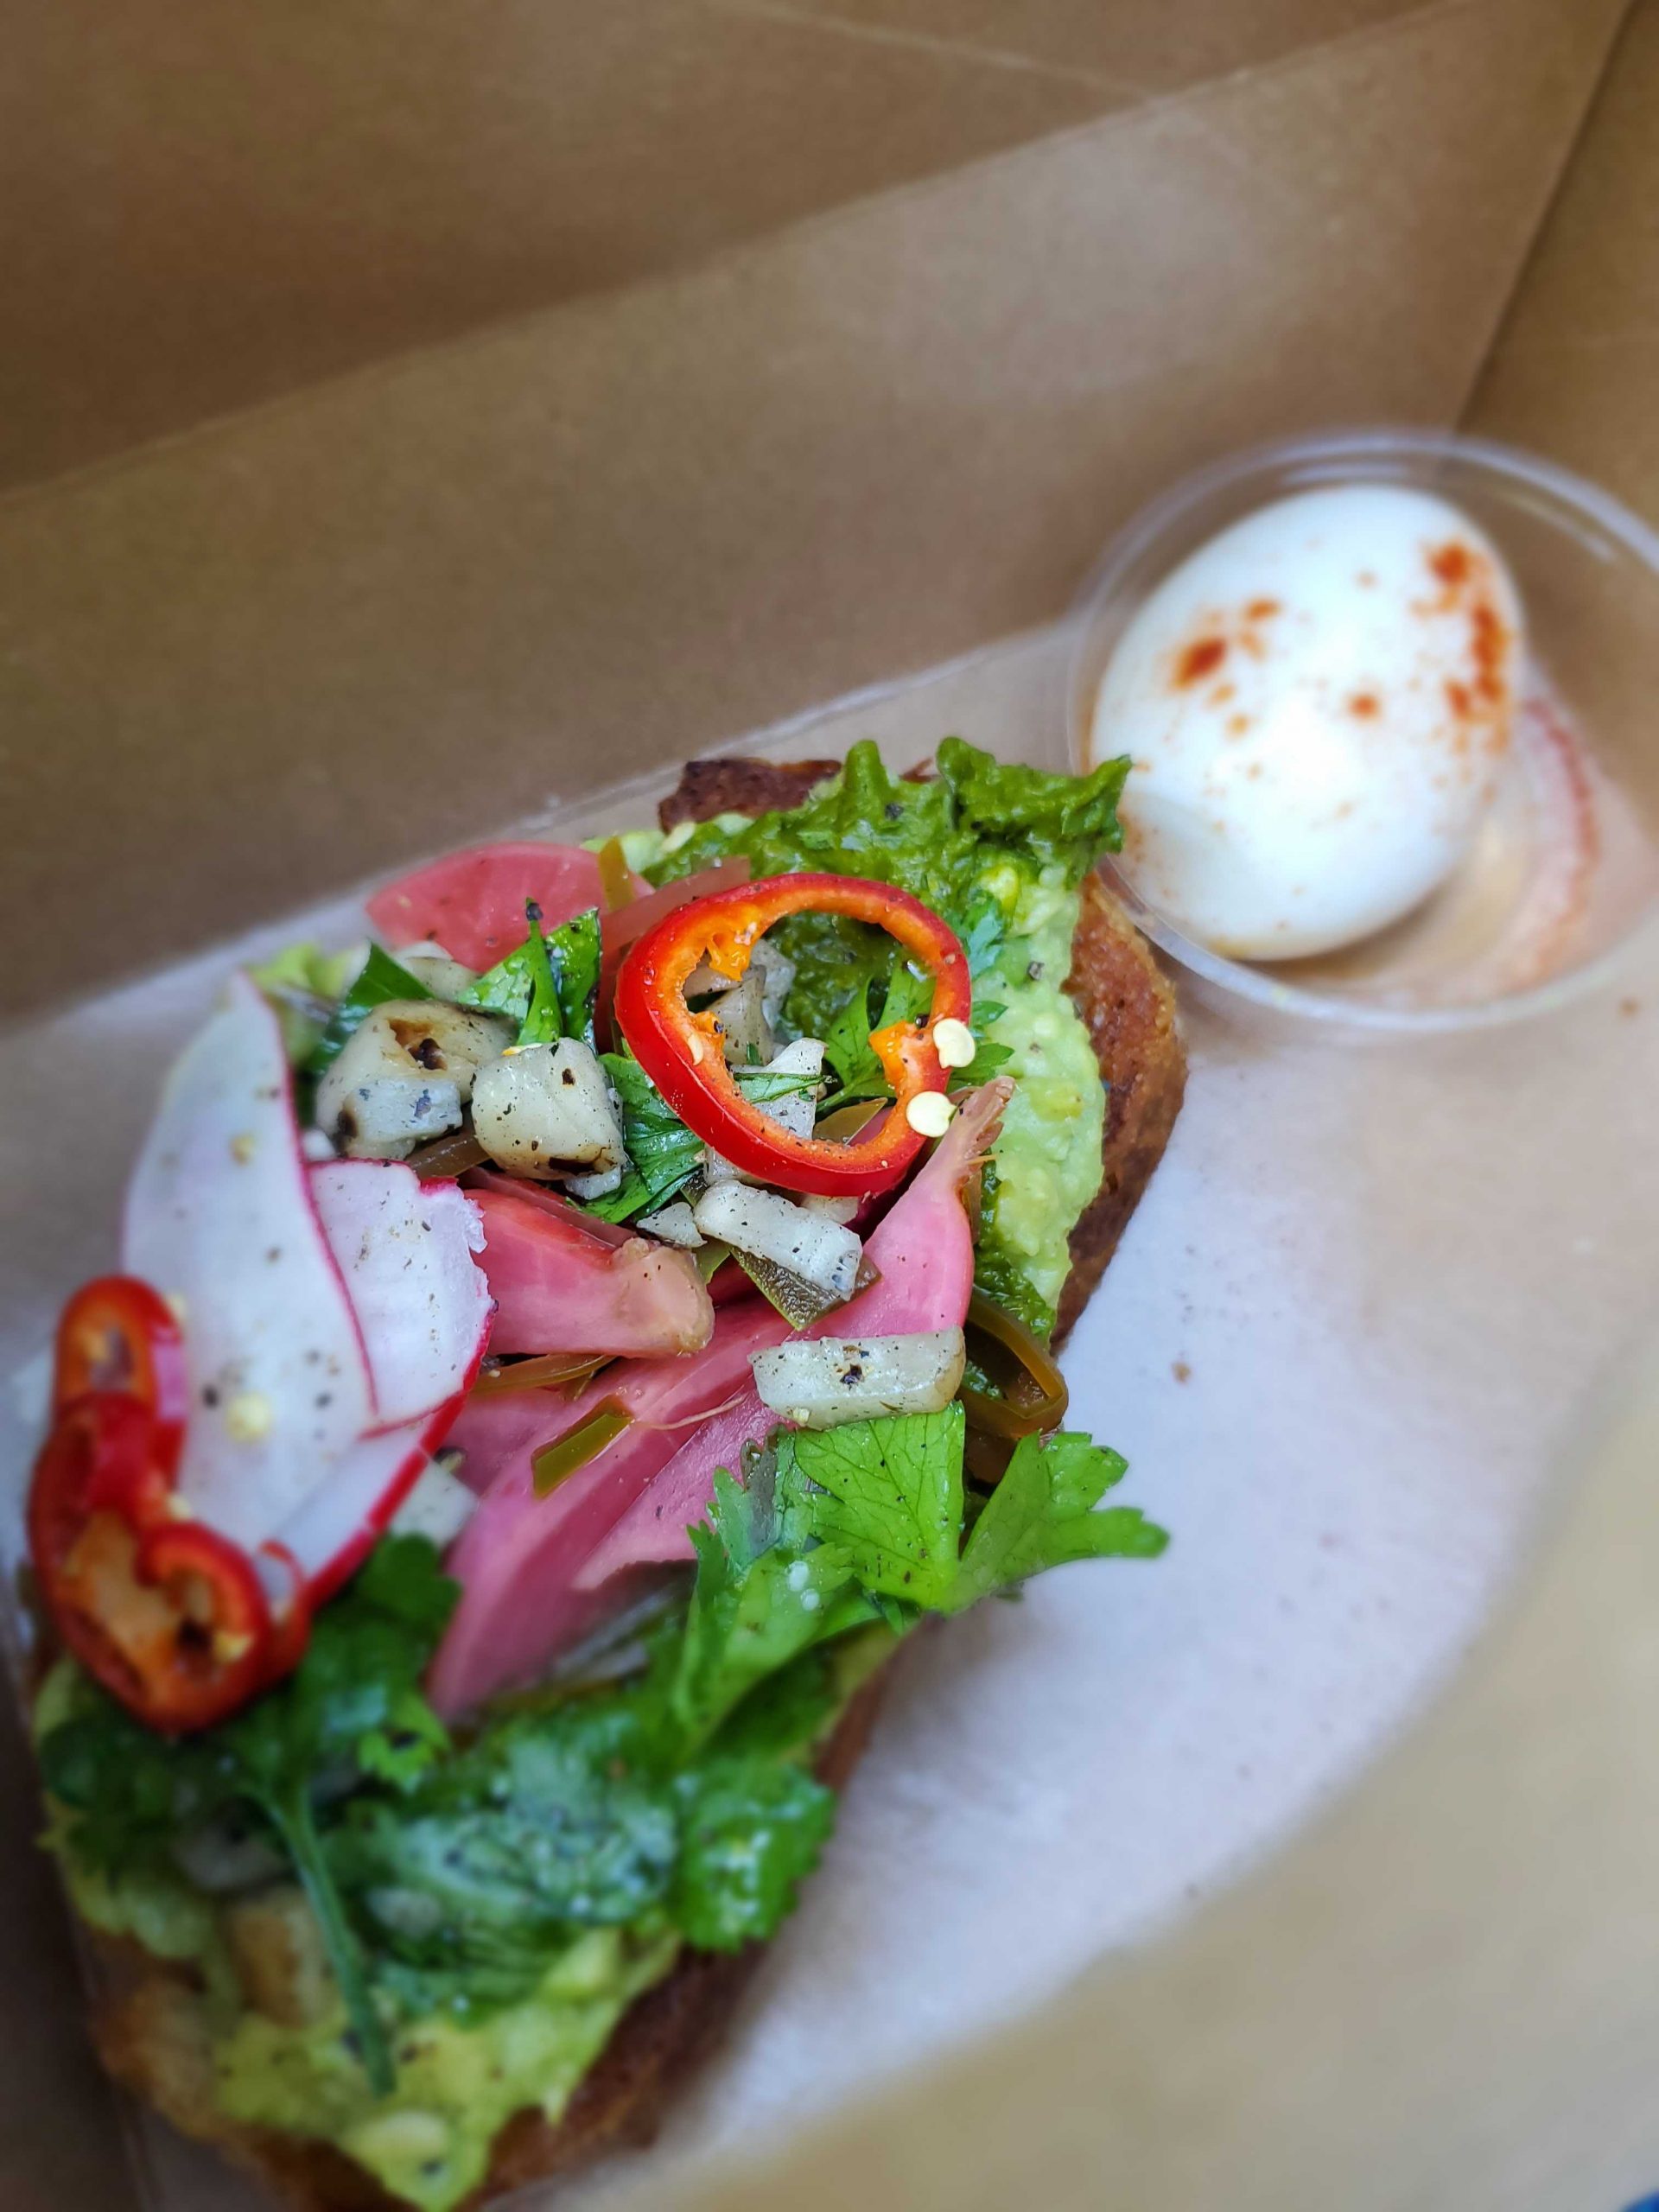 Avocado toast and hardboiled egg in one of the Box of Good meal boxes